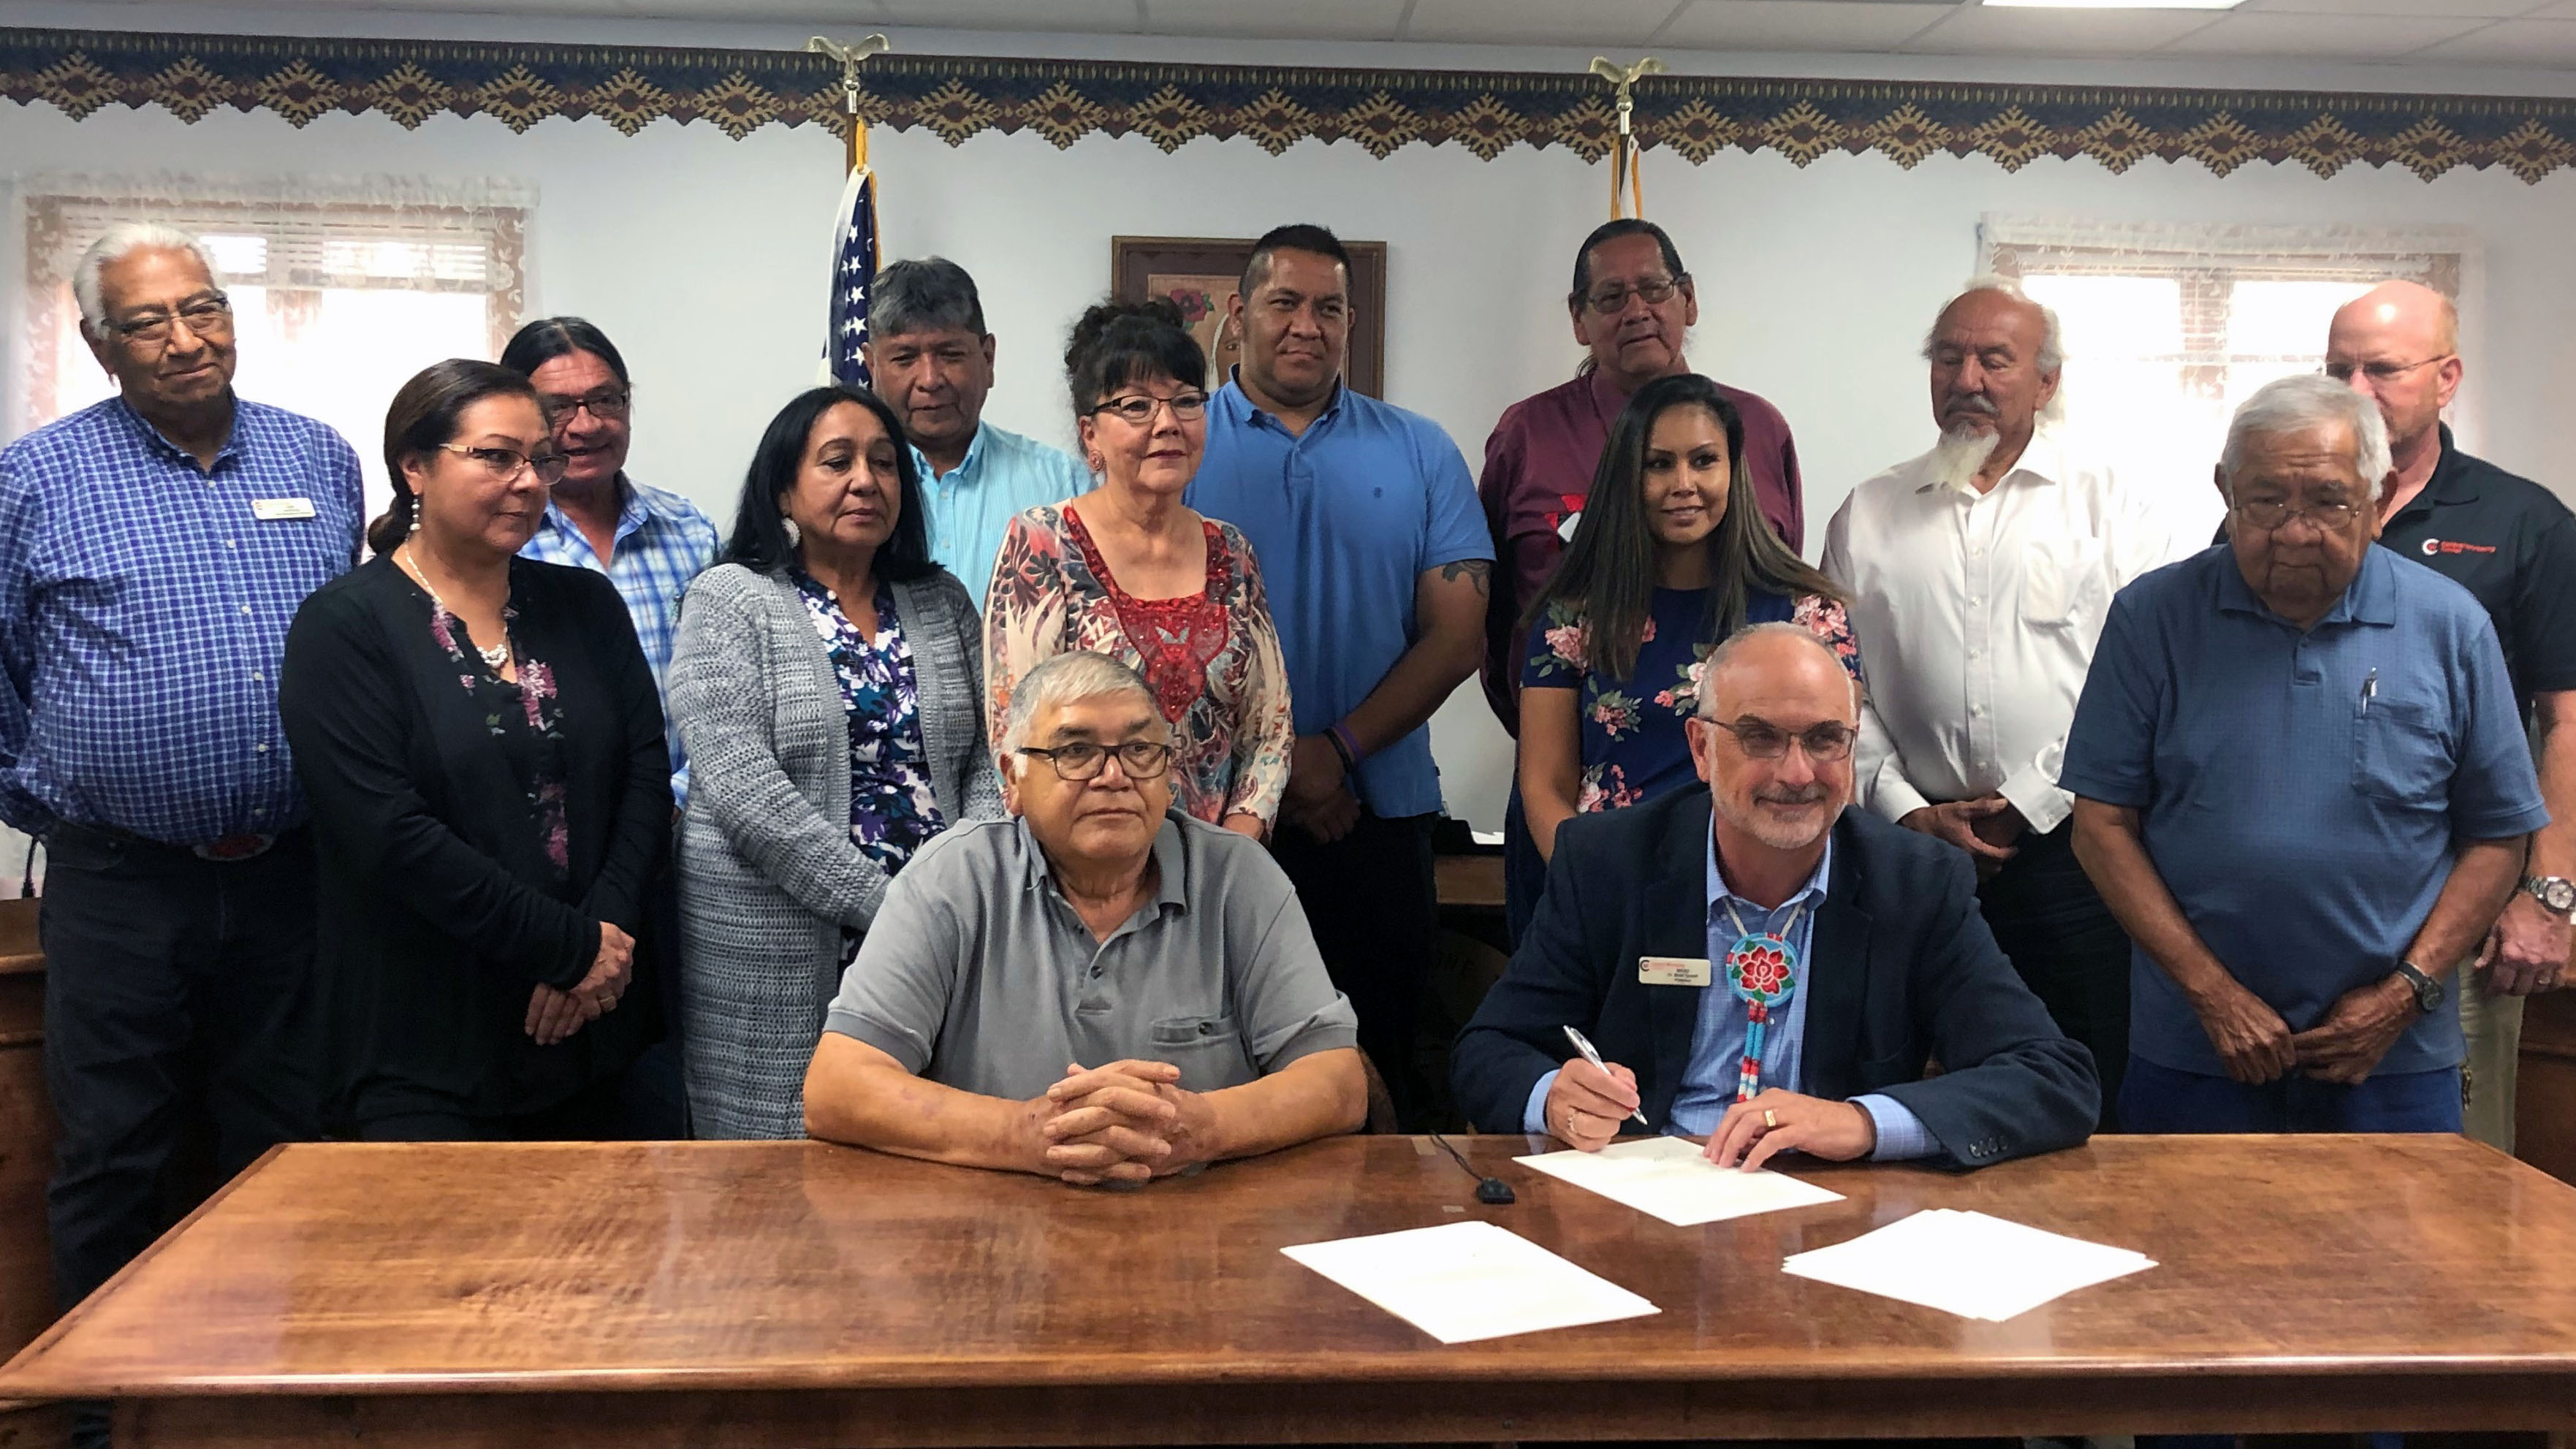 Eastern Shoshone Tribal Council members and Dr. Brad Tyndall signing MOU at tribal council chambers.